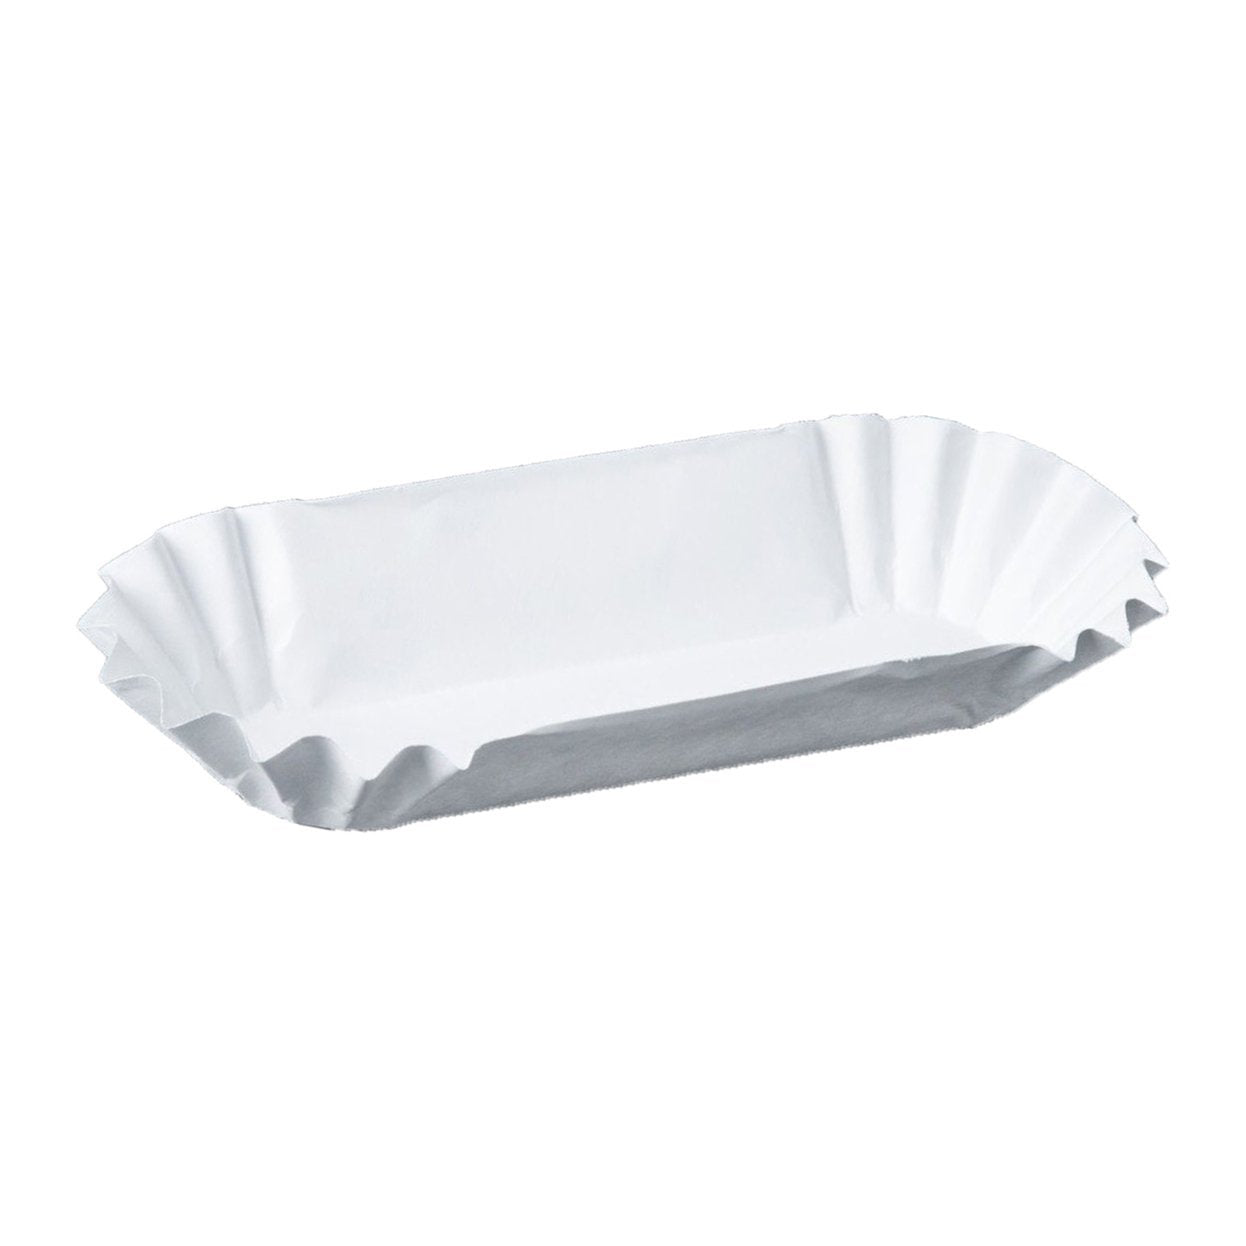 Serving Paper Trays